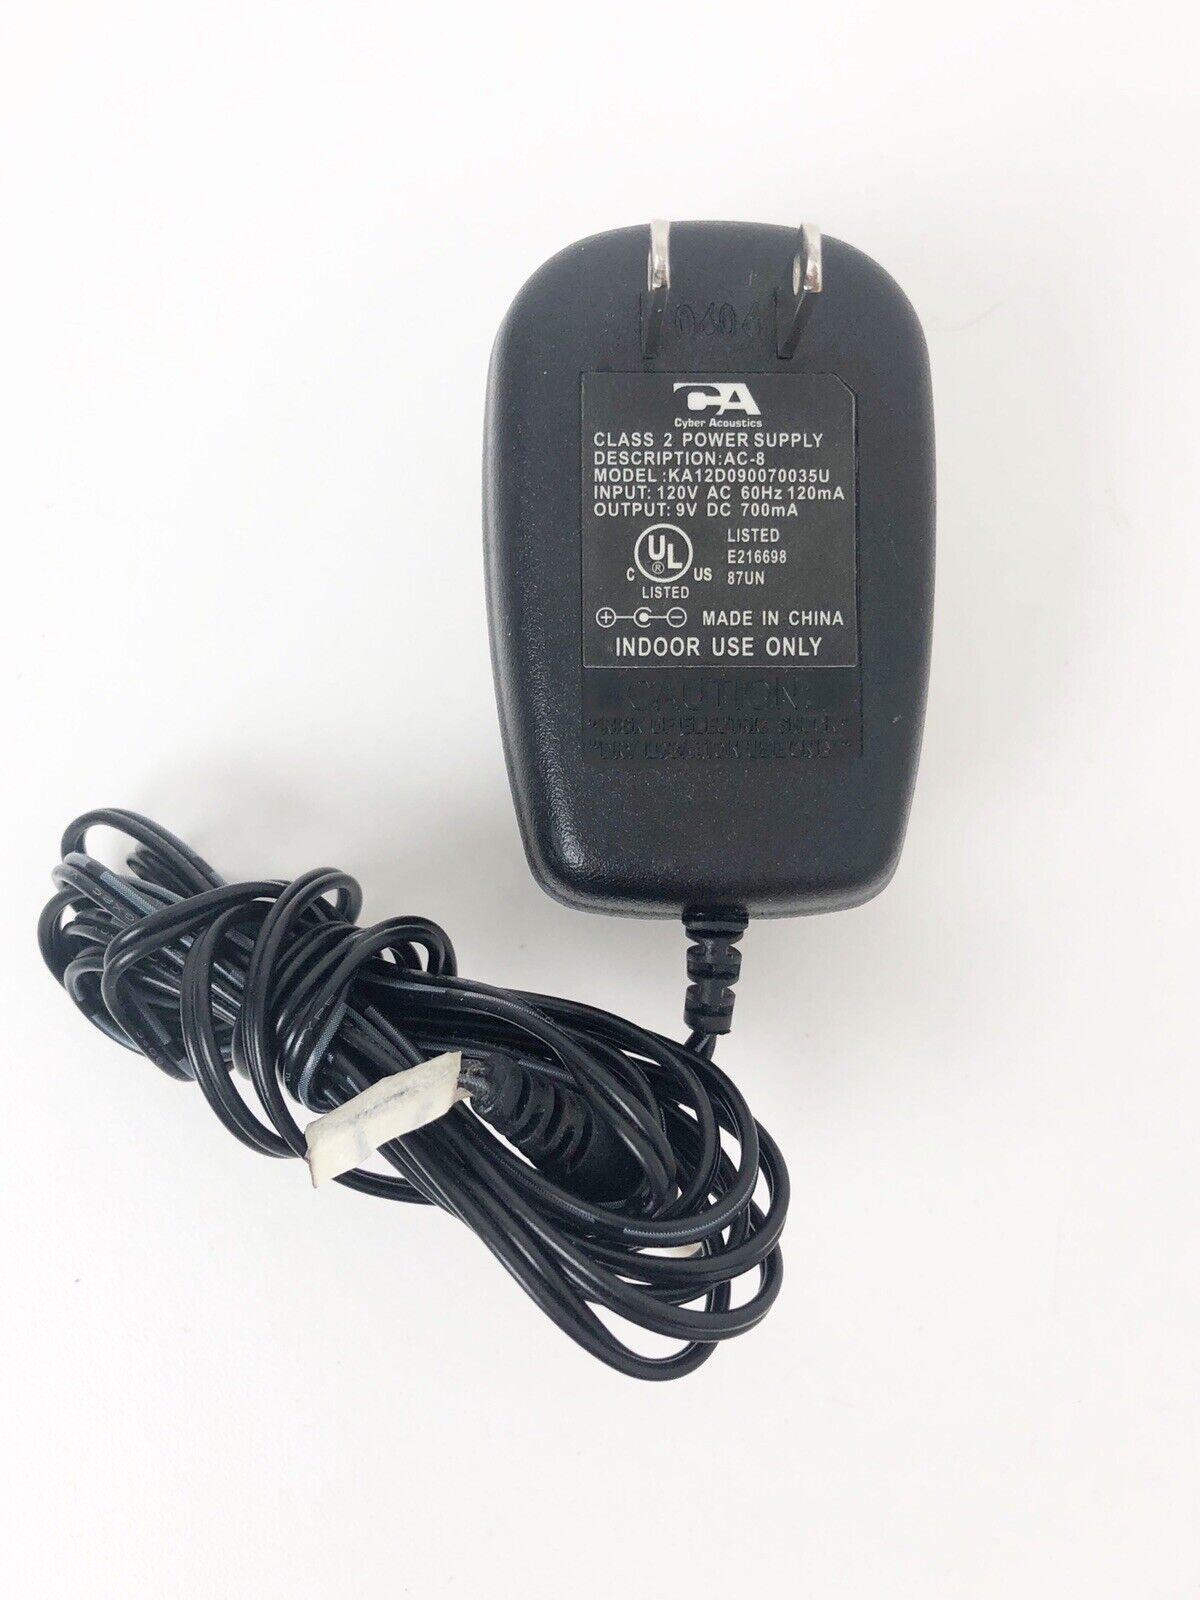 Cyber Acoustics KA12D090070035u AC Adapter Power Supply Charger 9 Volts 700mA Type: AC/DC Adapter Features: Powered